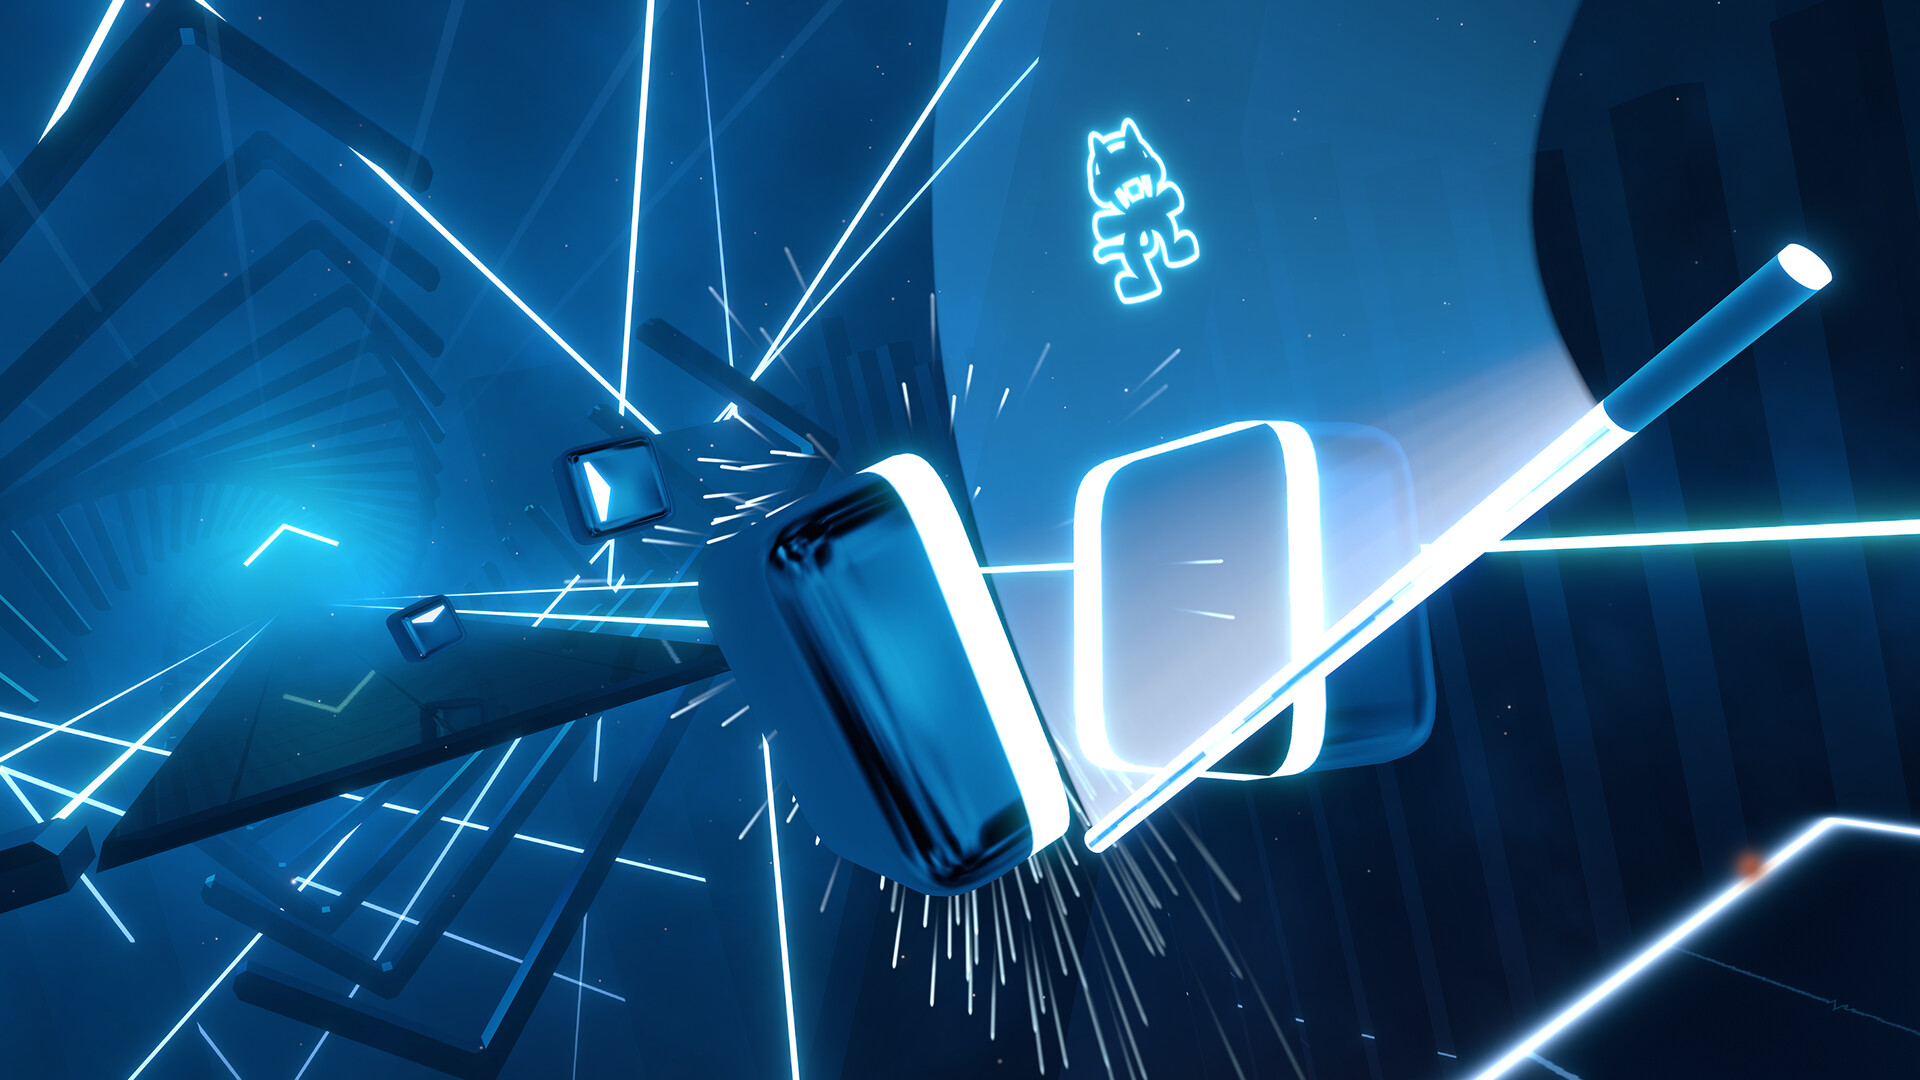 Beat Saber - Muzzy - "Feeling Stronger (feat. Charlotte Colley)" Featured Screenshot #1